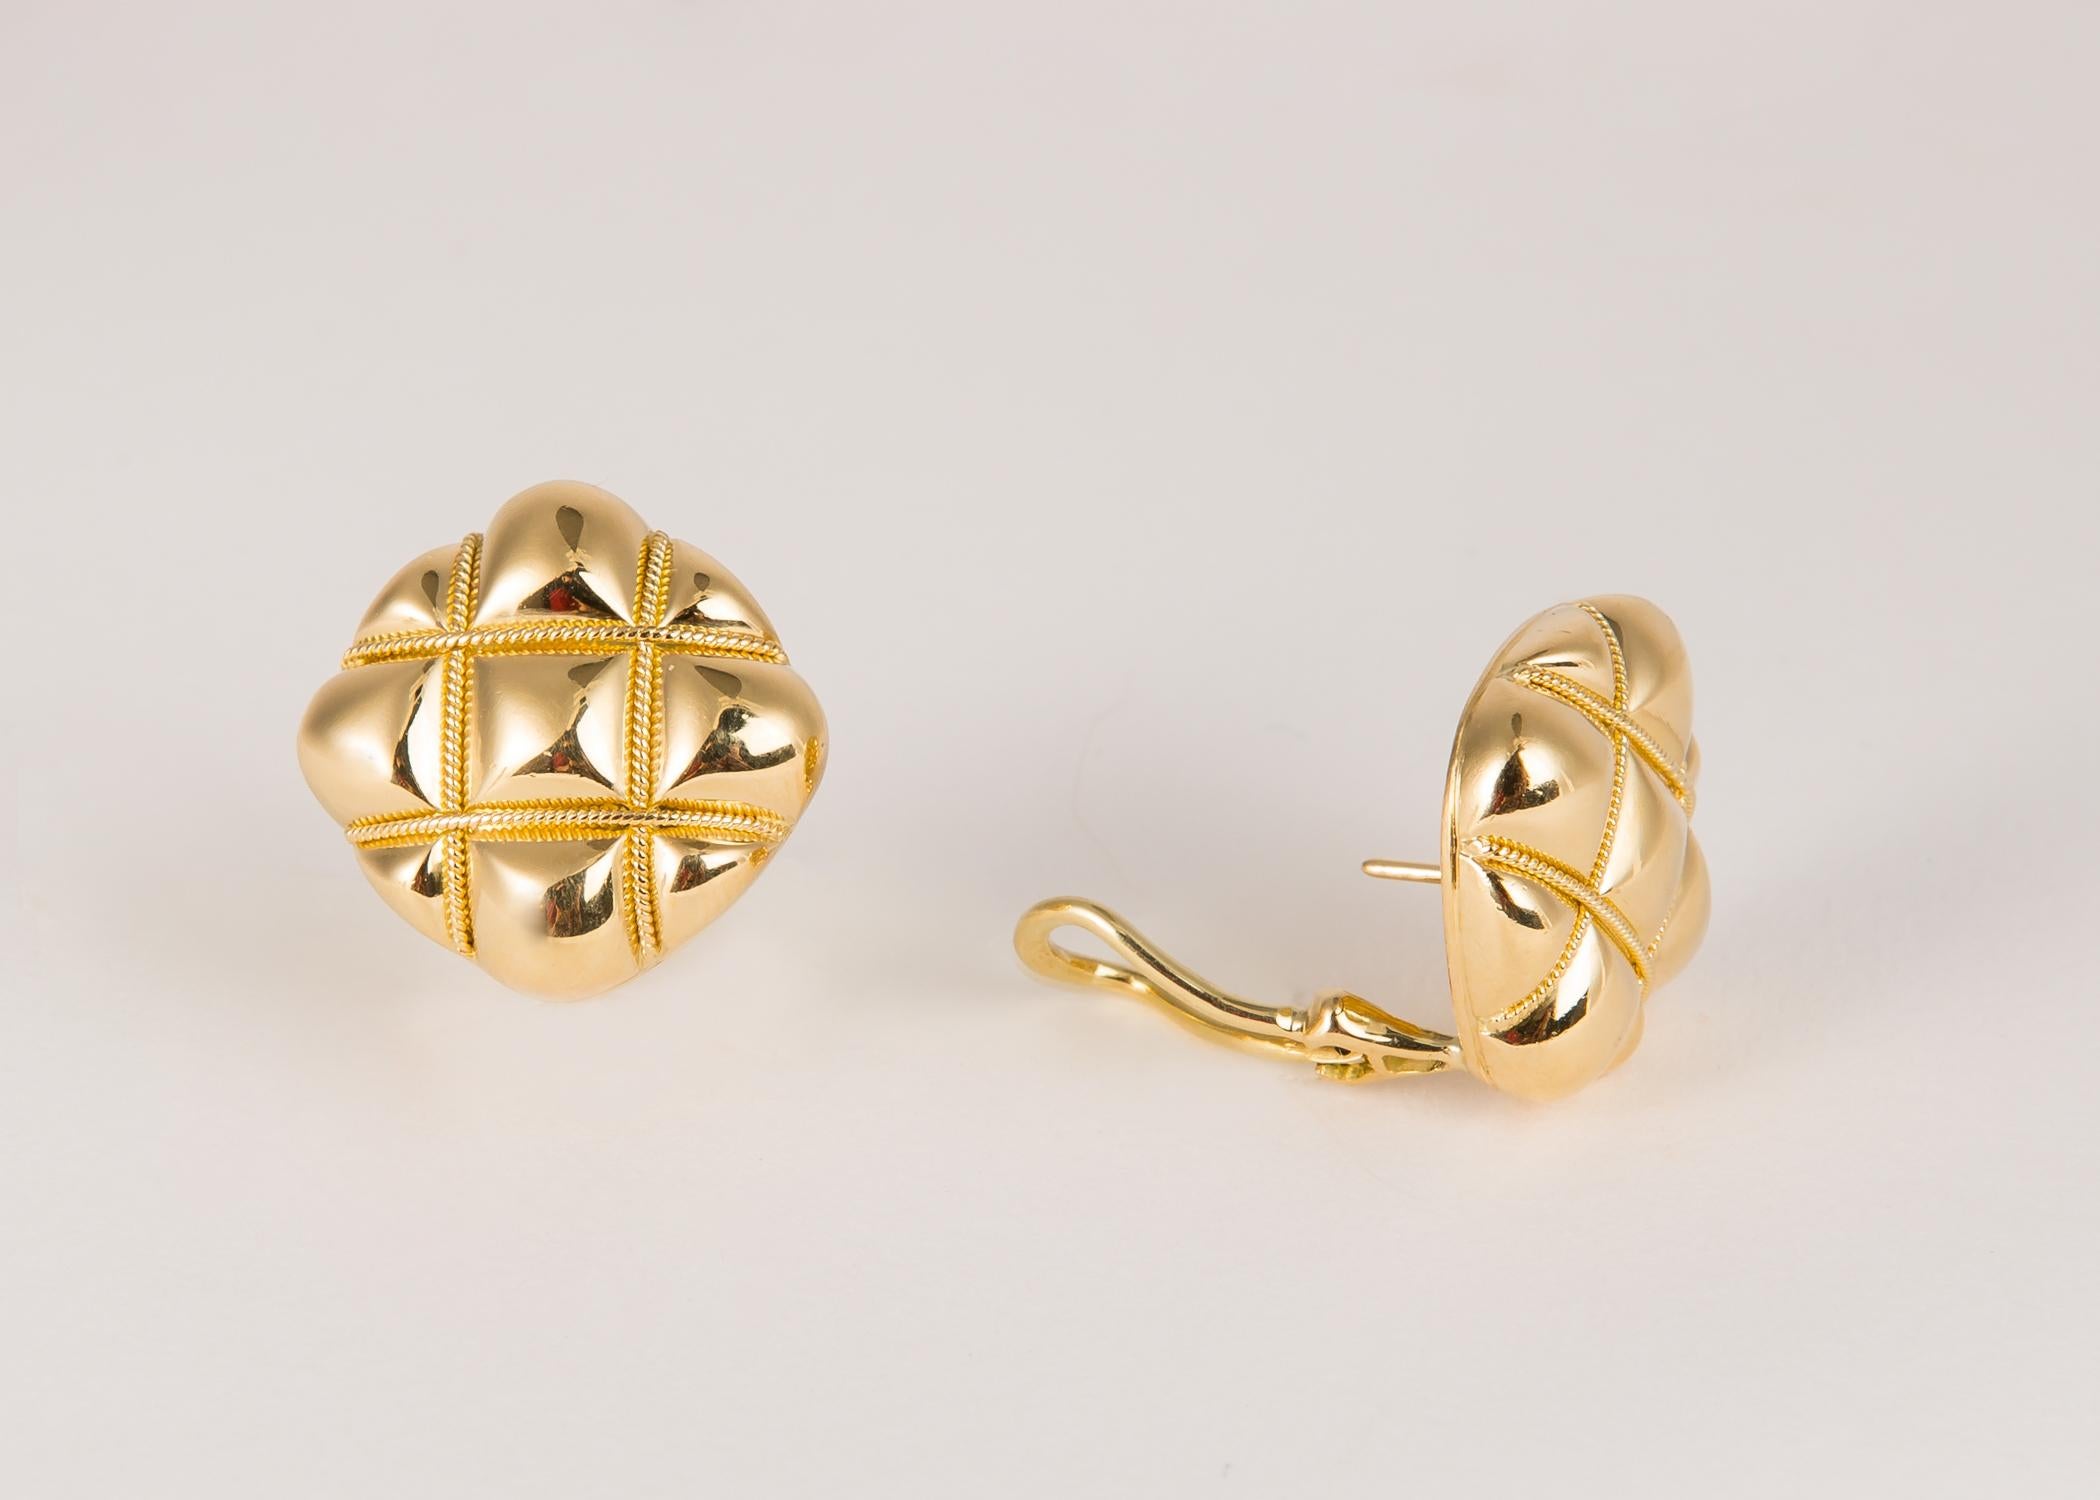 A classic timeless Tiffany & Co. design. Rich 18k gold Just over 3/4's of an inch in size.